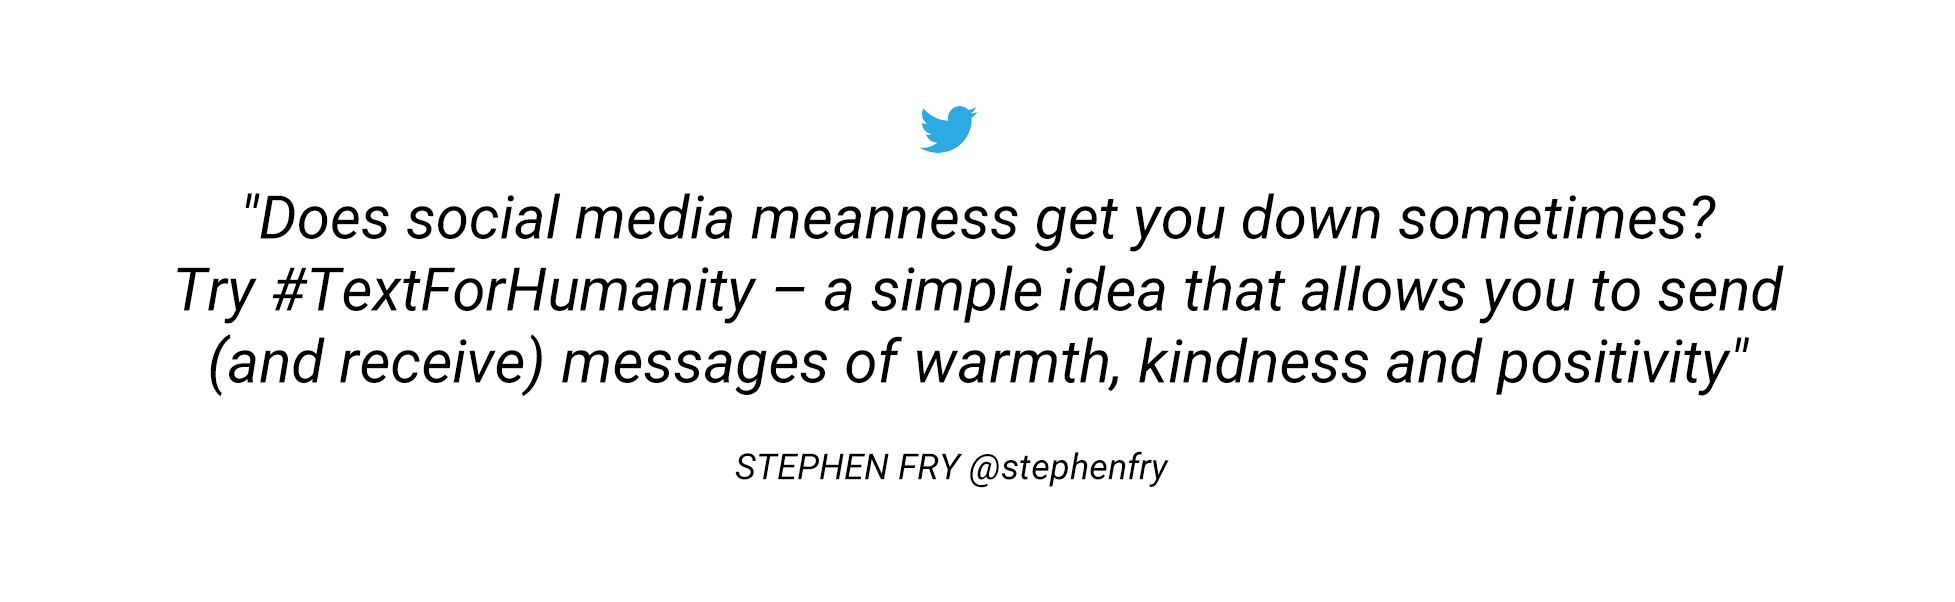 Text for Humanity - Stephen Fry 